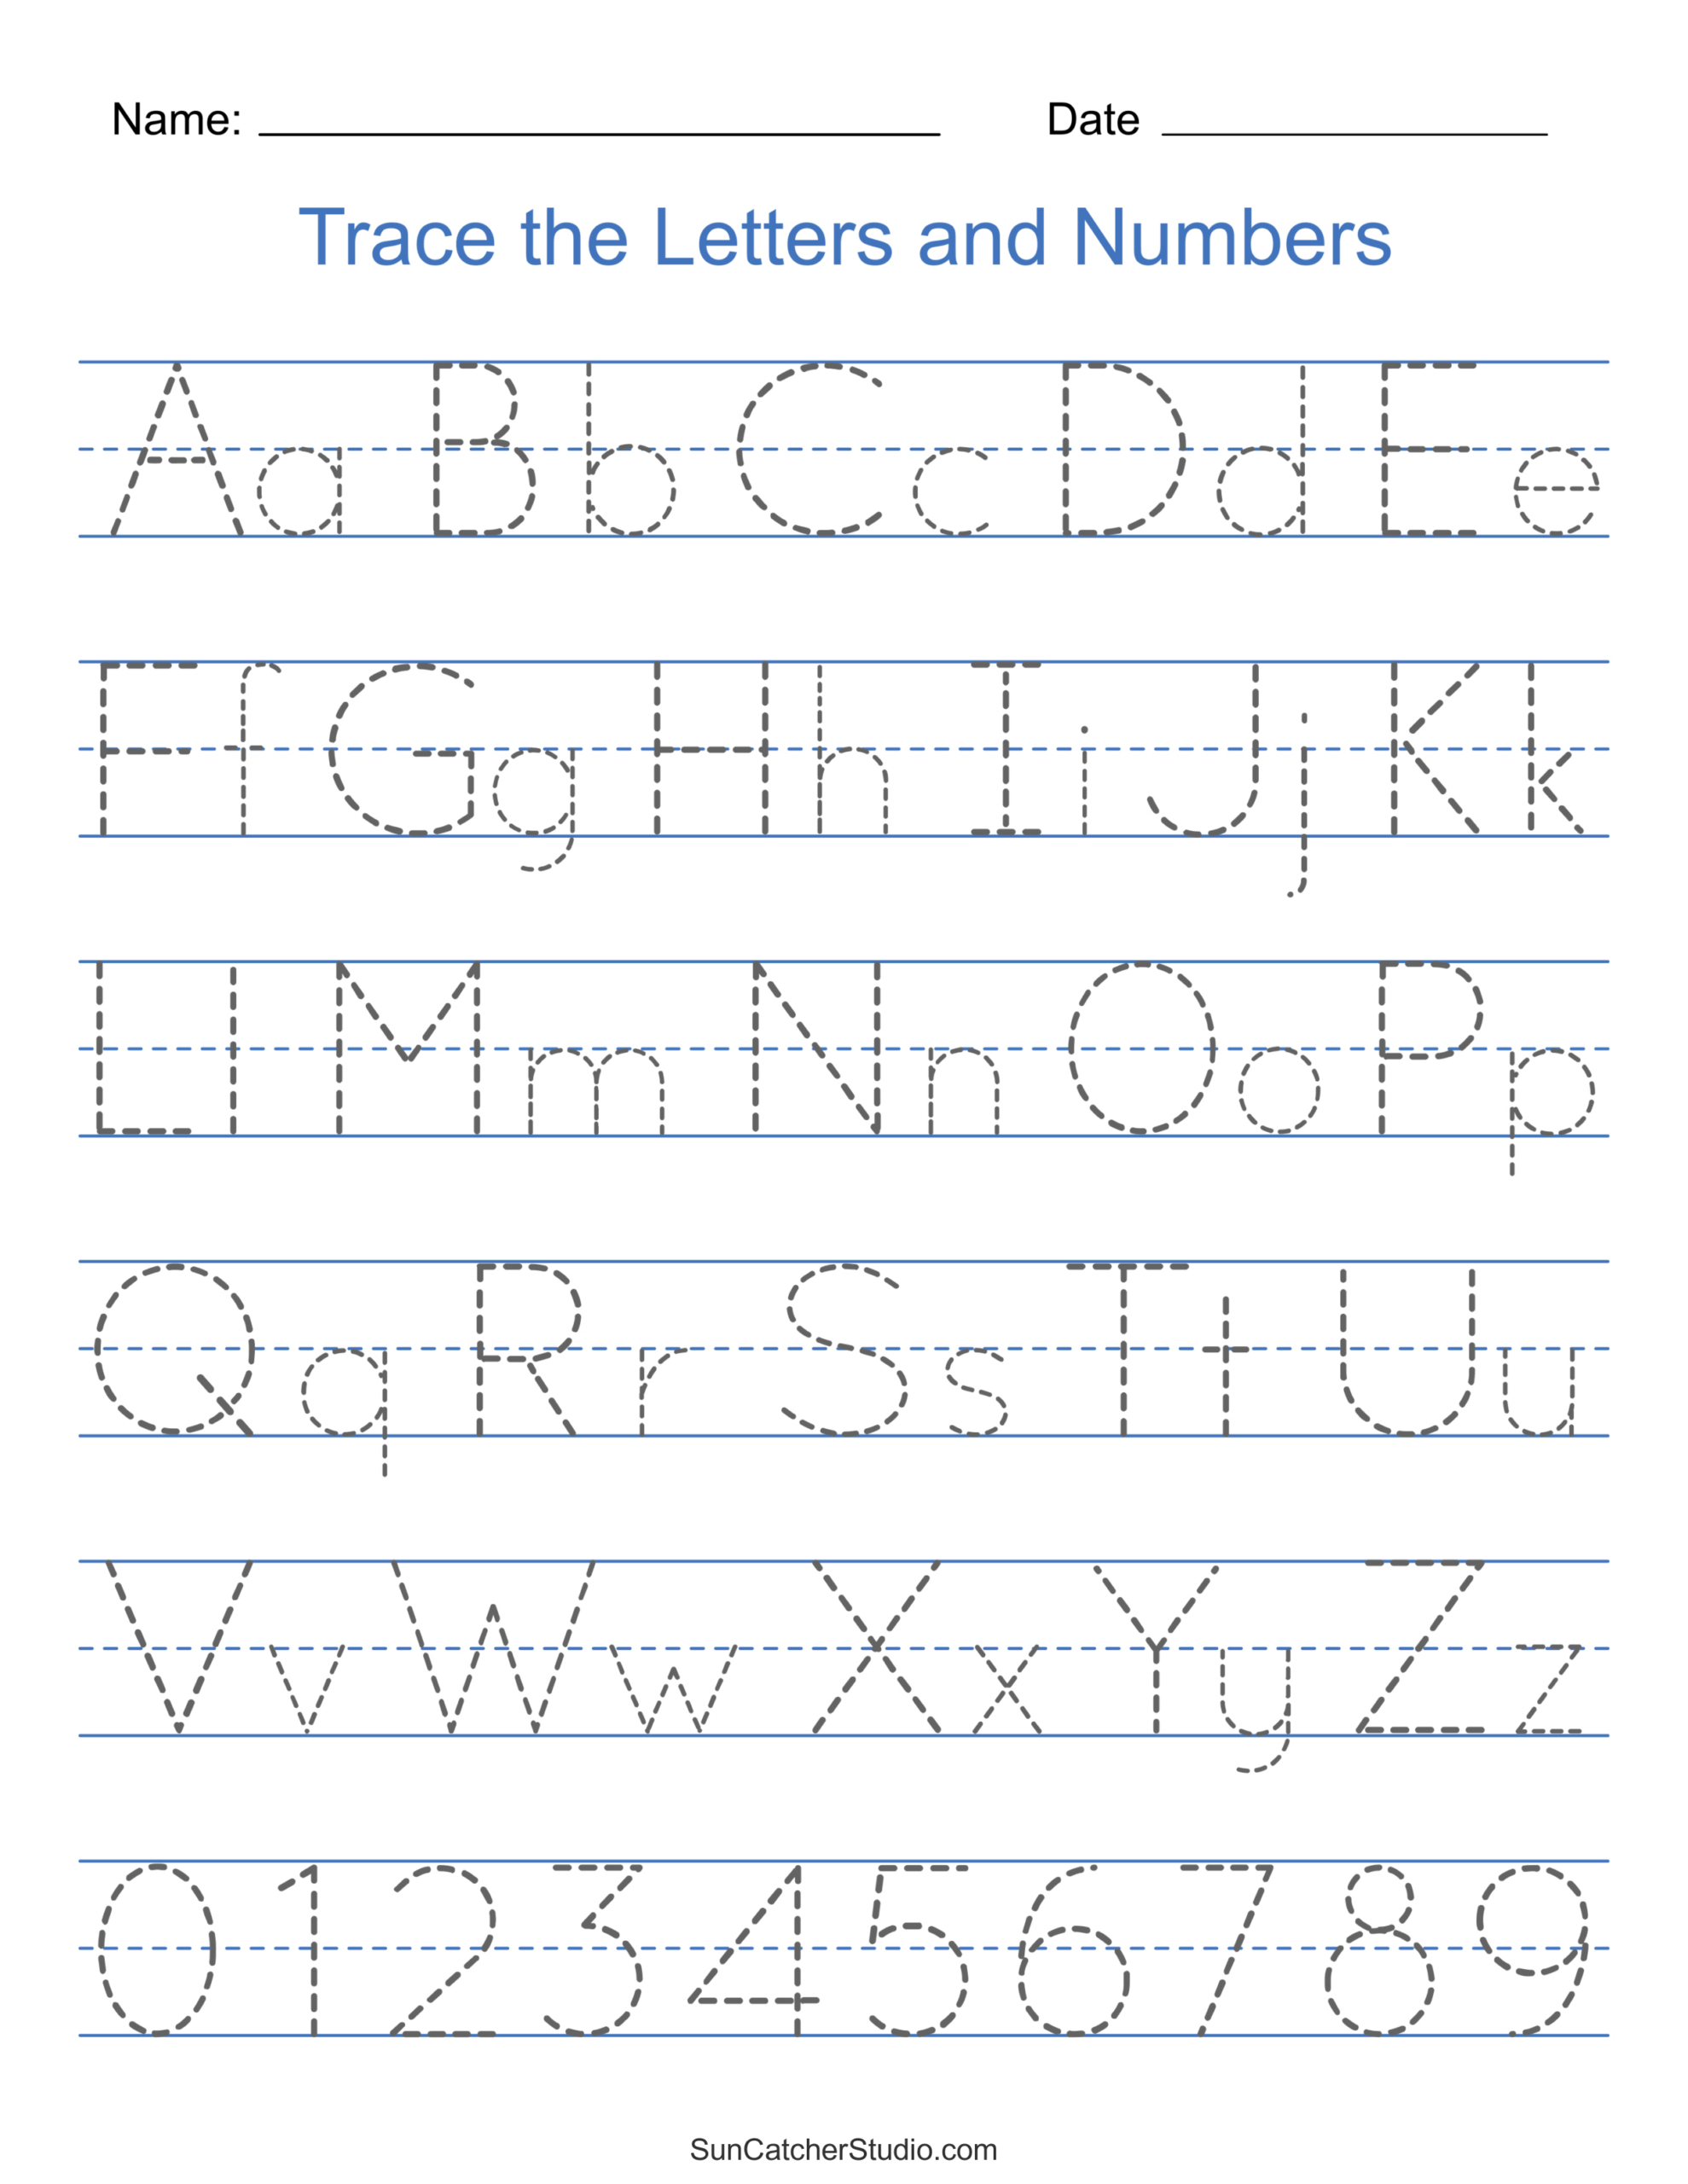 Tracing Alphabet Letters (Printable Handwriting Worksheets) – Diy - Free Printable Alphabet Worksheets A-Z